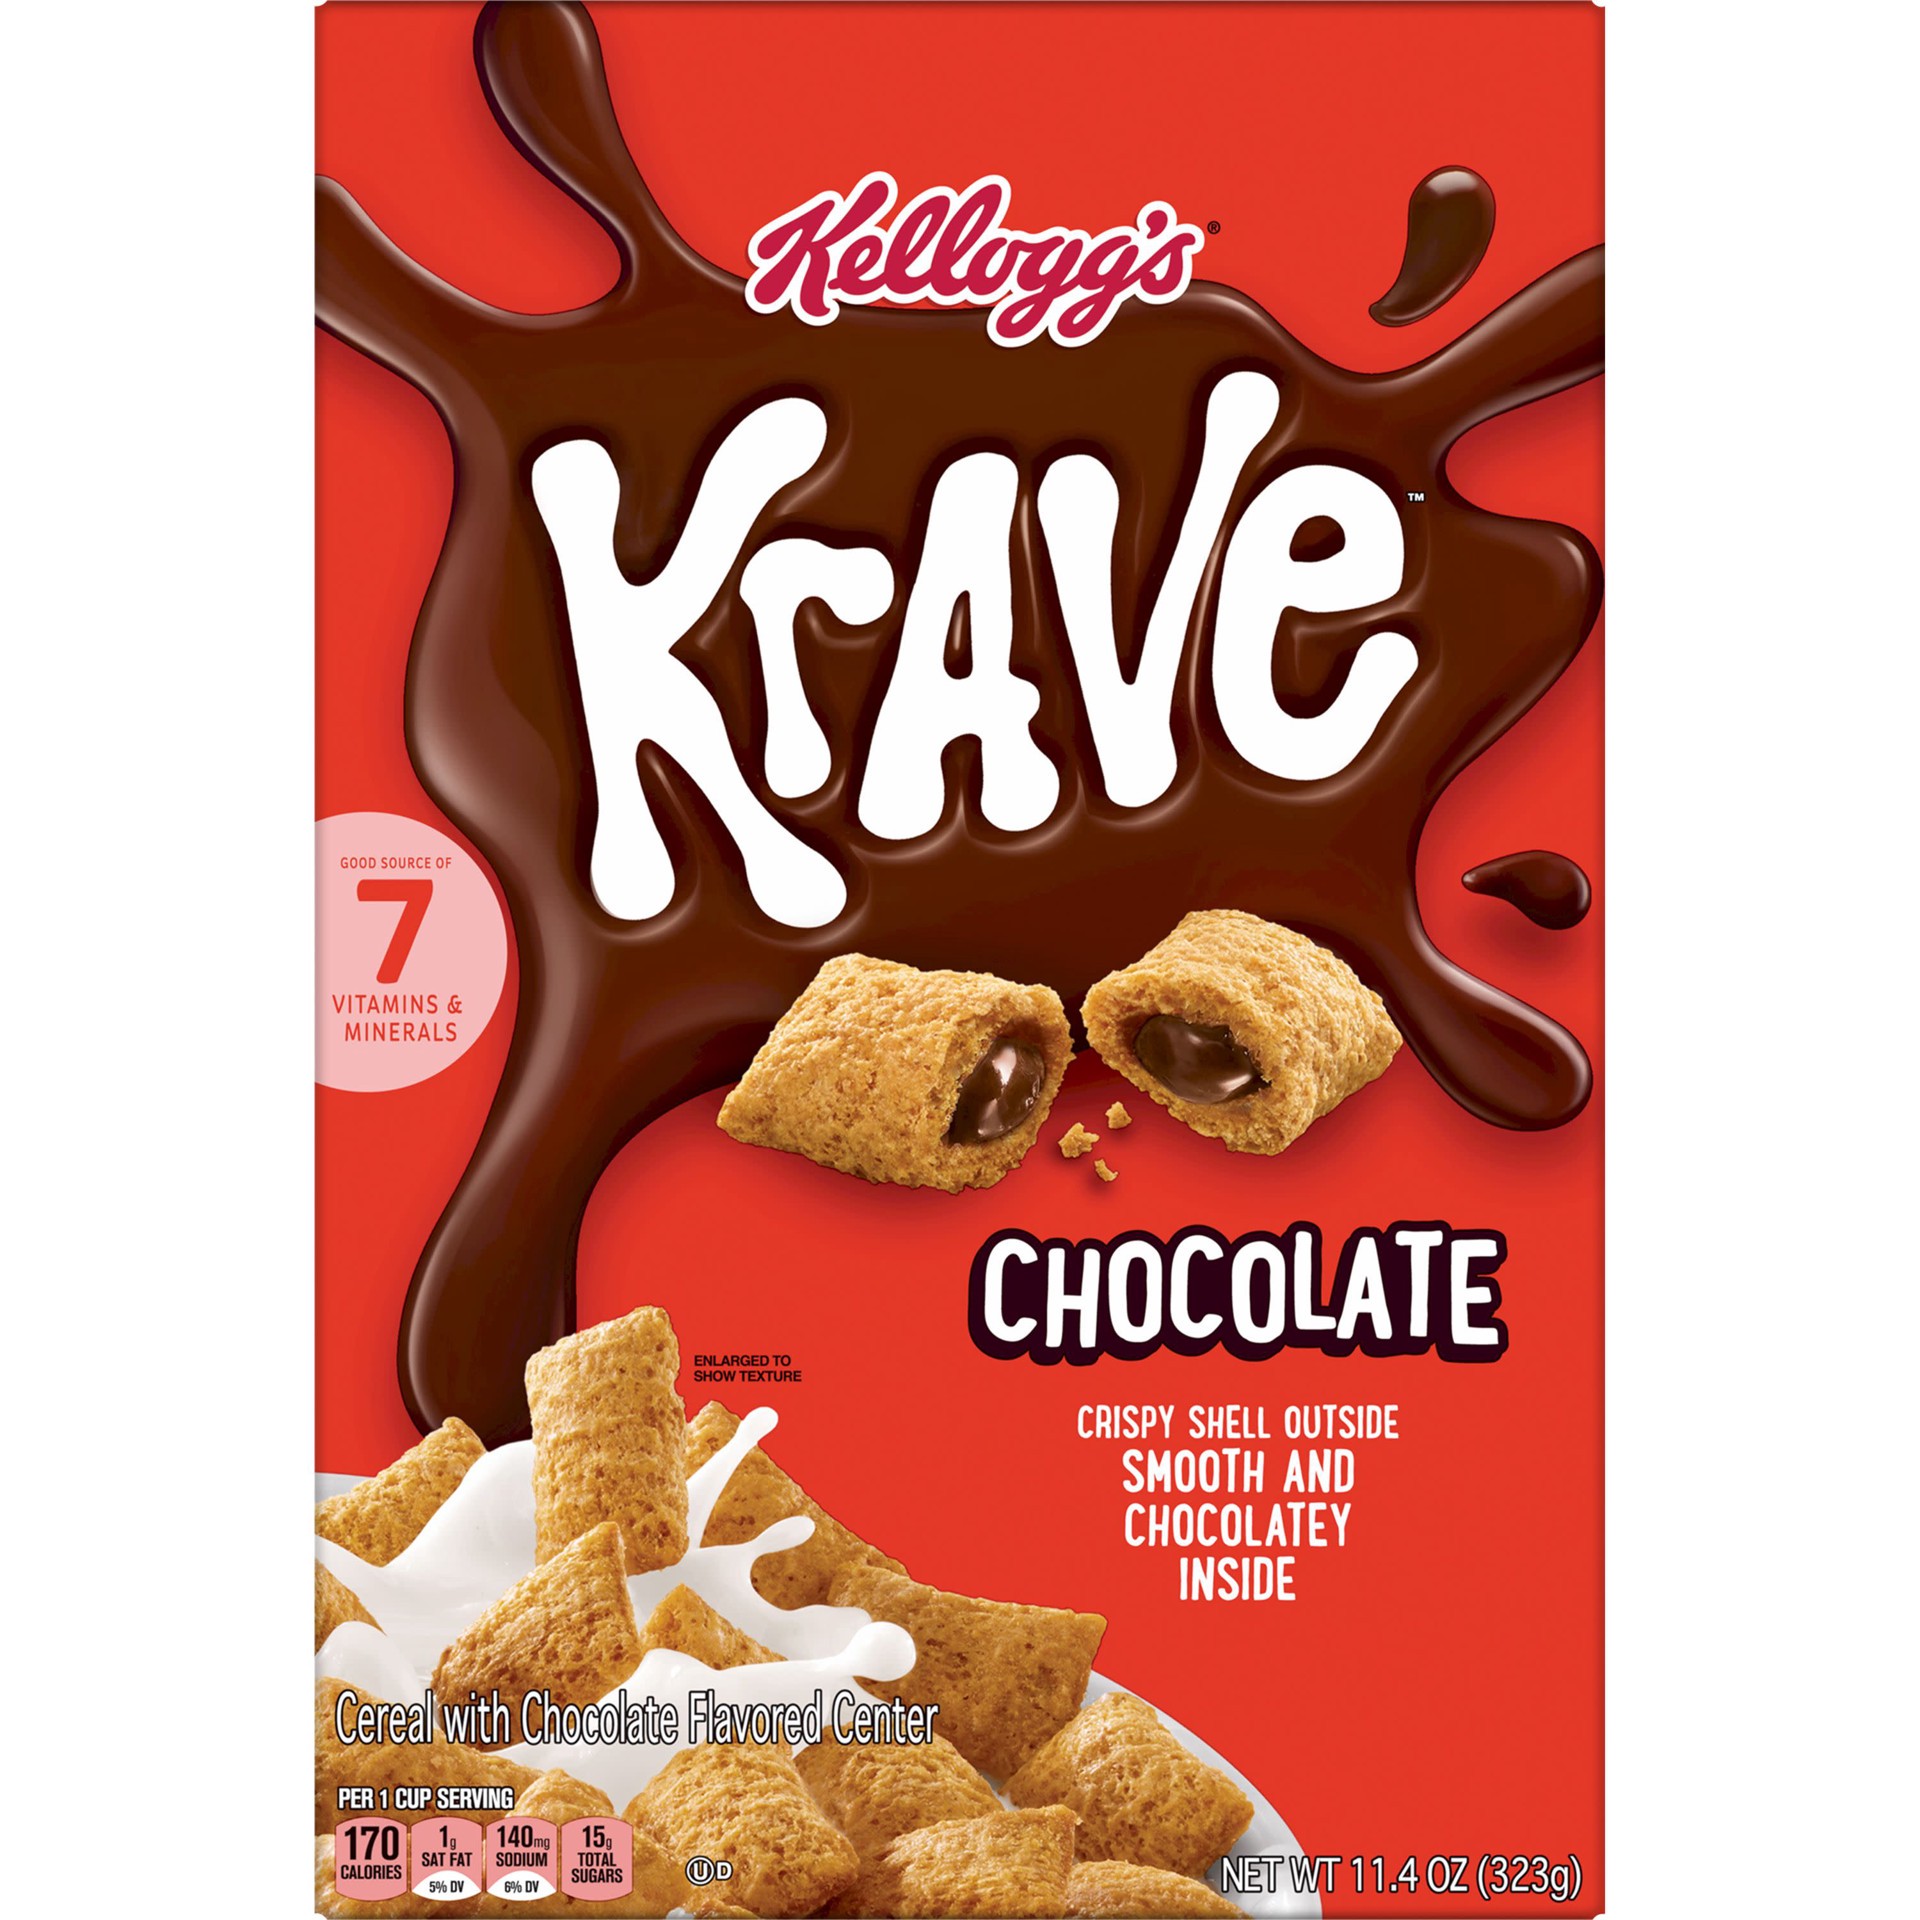 slide 1 of 7, Krave Kellogg's Krave Cold Breakfast Cereal, 7 Vitamins and Minerals, Made with Whole Grain, Chocolate, 11.4 oz